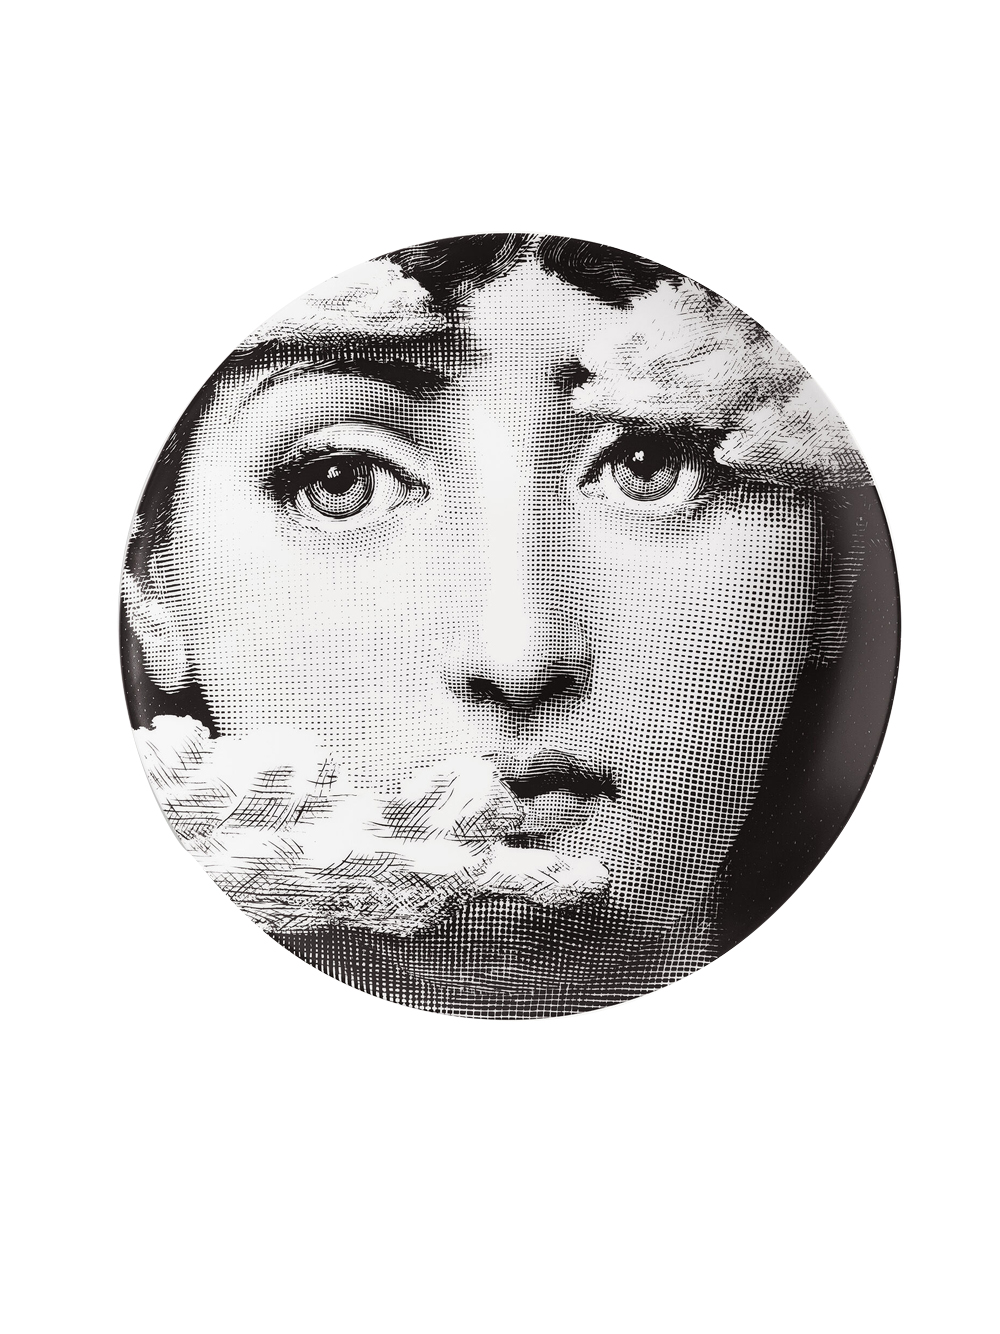 Fornasetti distorted face plate - Black, £150.00